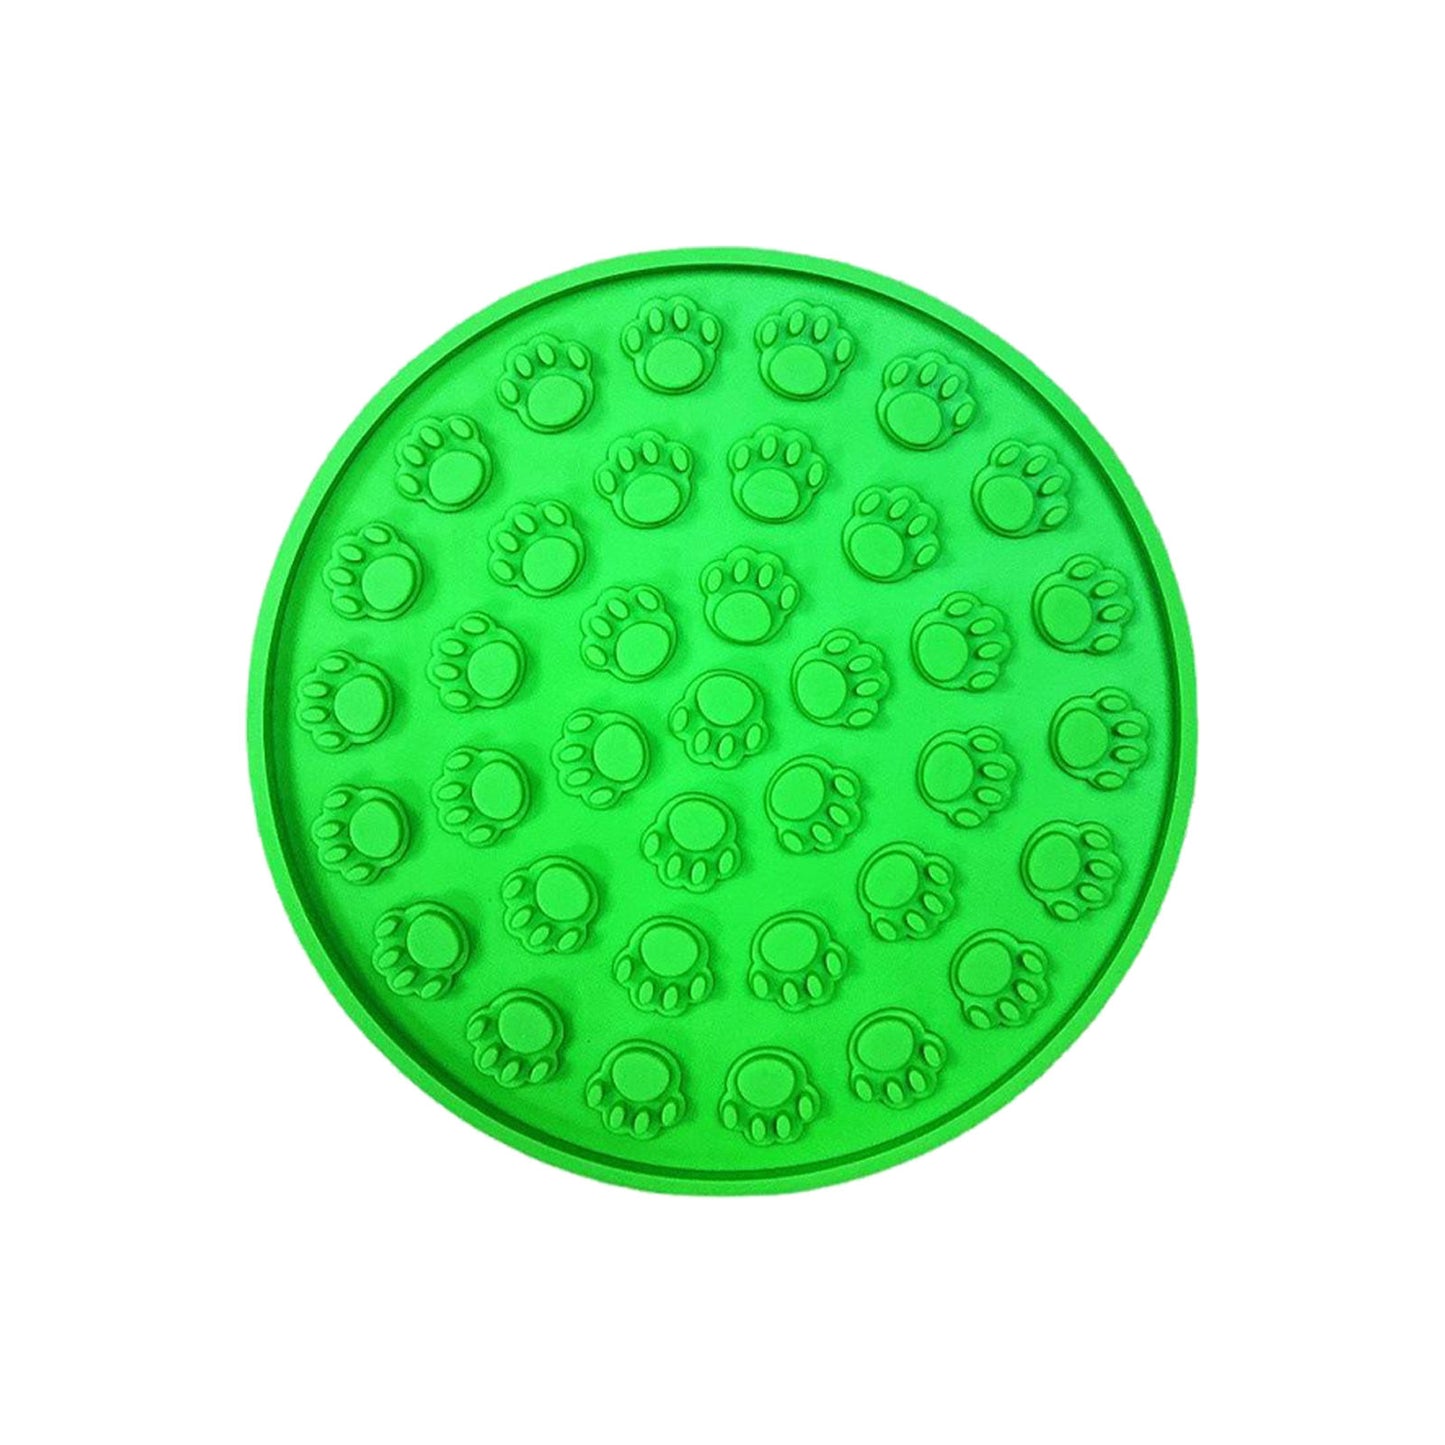 Pawfriends Silicone Dog Cat Pet Licking Pad Anti-Anxiety Slow-Feeding Licking Pad Green